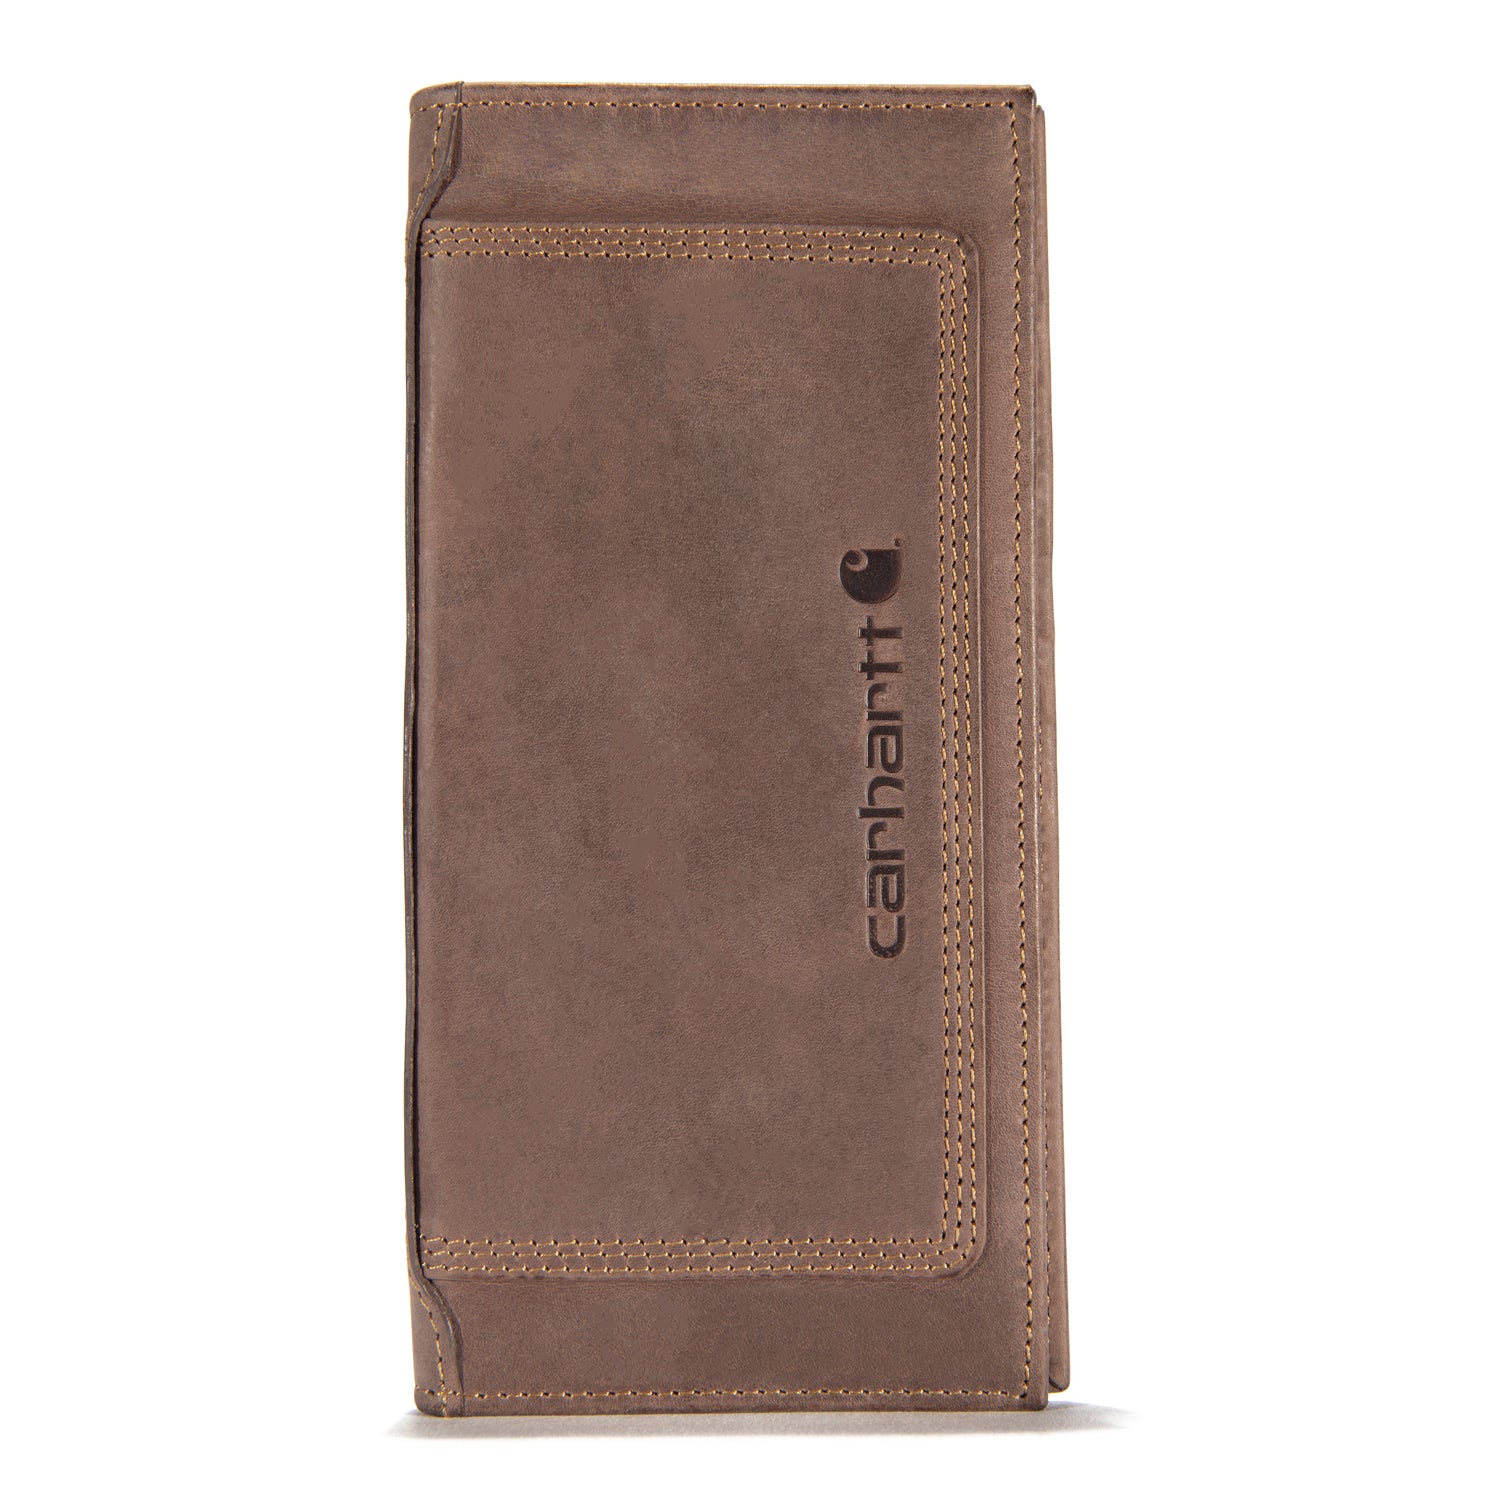 BOSS - Leather card holder with contrast logo and ID window